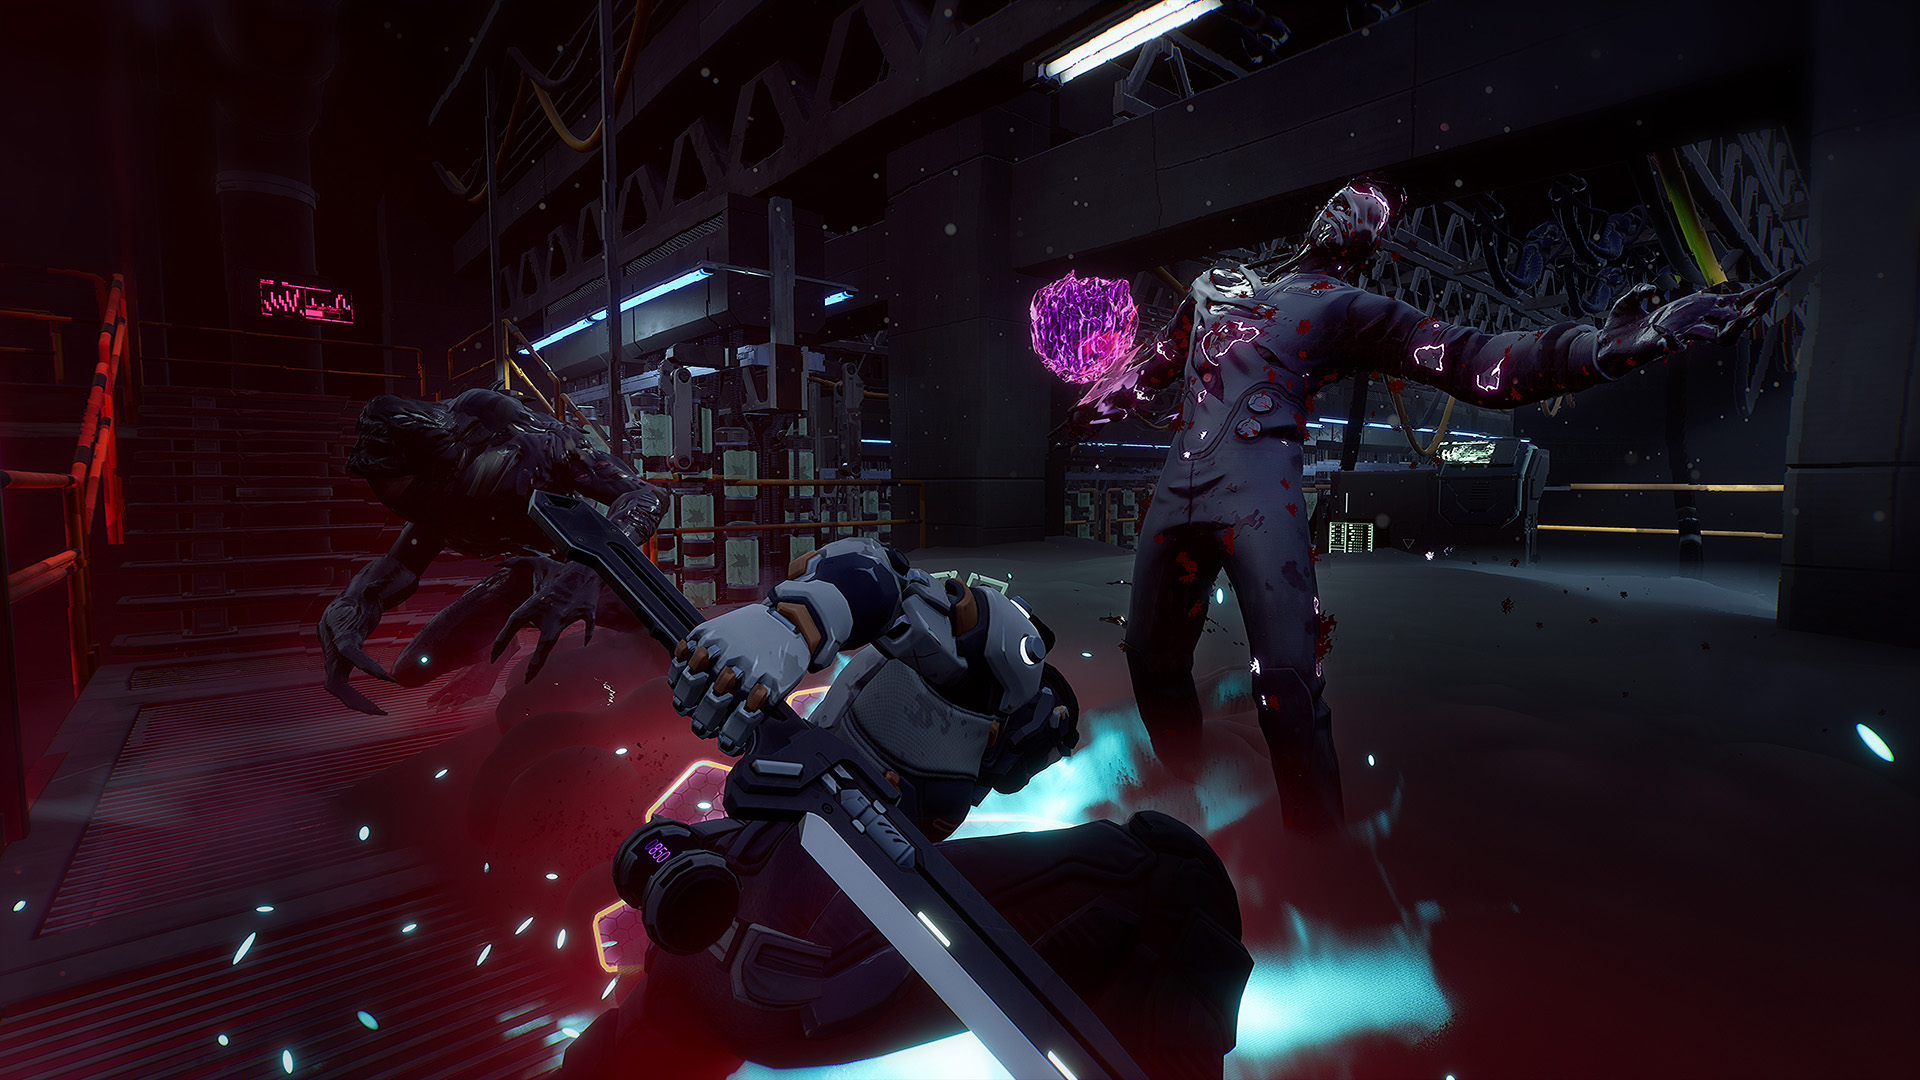 Lost Sector gives the player a variety of abilities to defeat their enemies